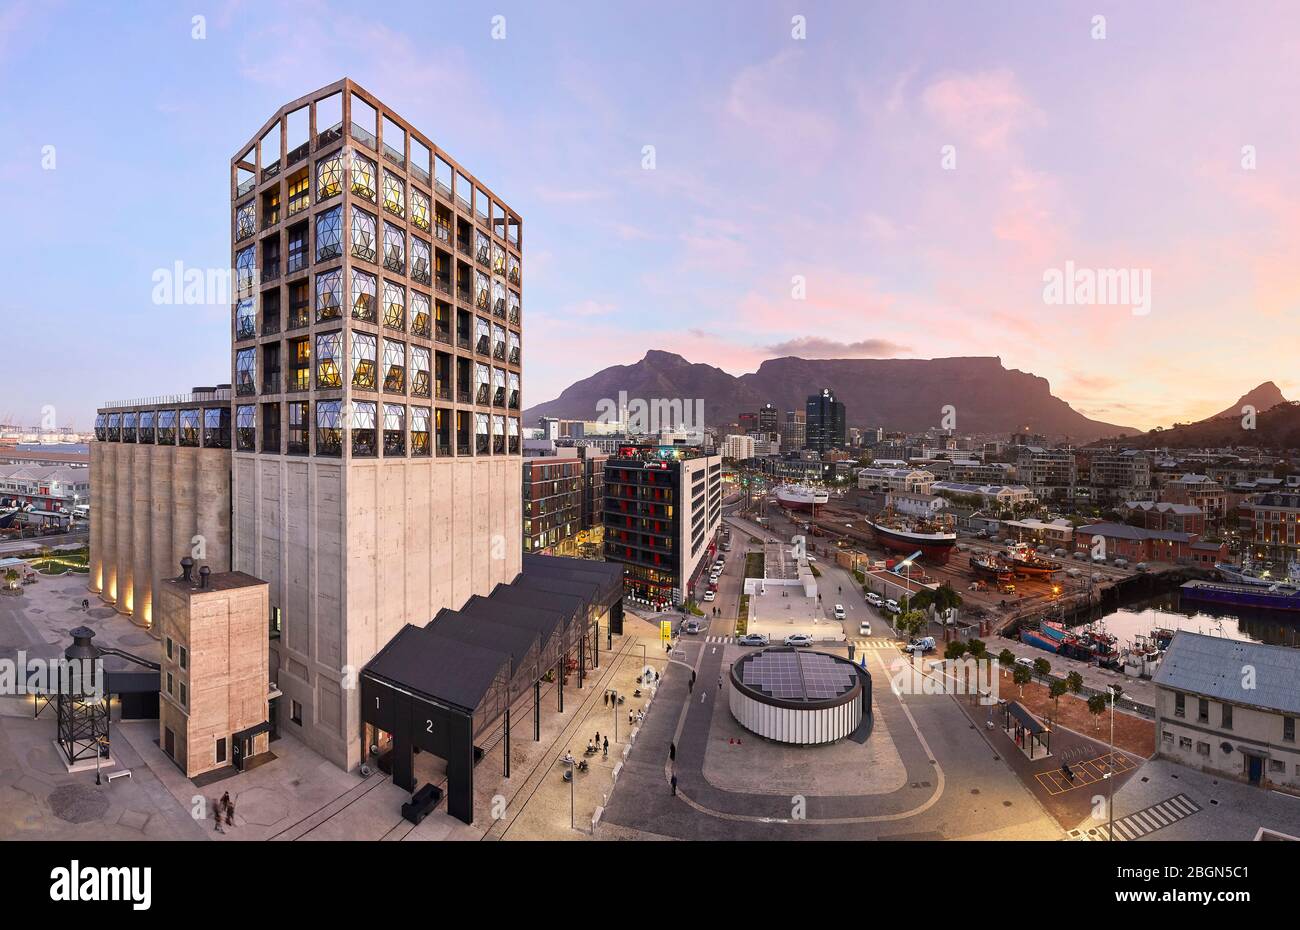 Elevated oblique view of exterior facade at dusk. Zeitz MOCAA, Cape Town, South Africa. Architect: Heatherwick Studio, 2017. Stock Photo